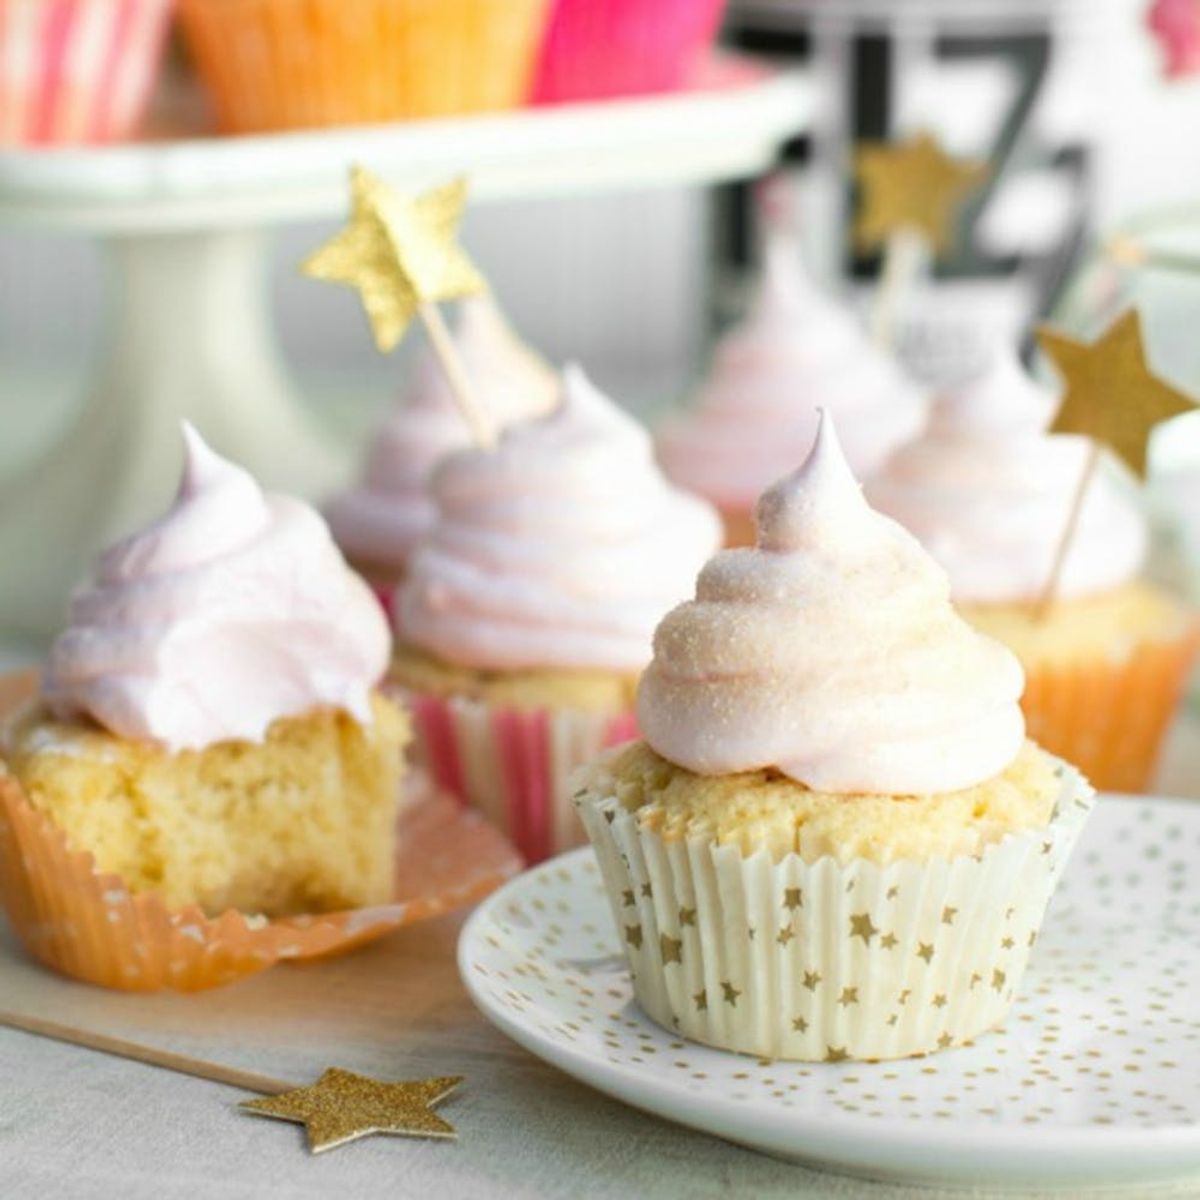 15 Champagne Cupcake Recipes for a Poppin’ New Year